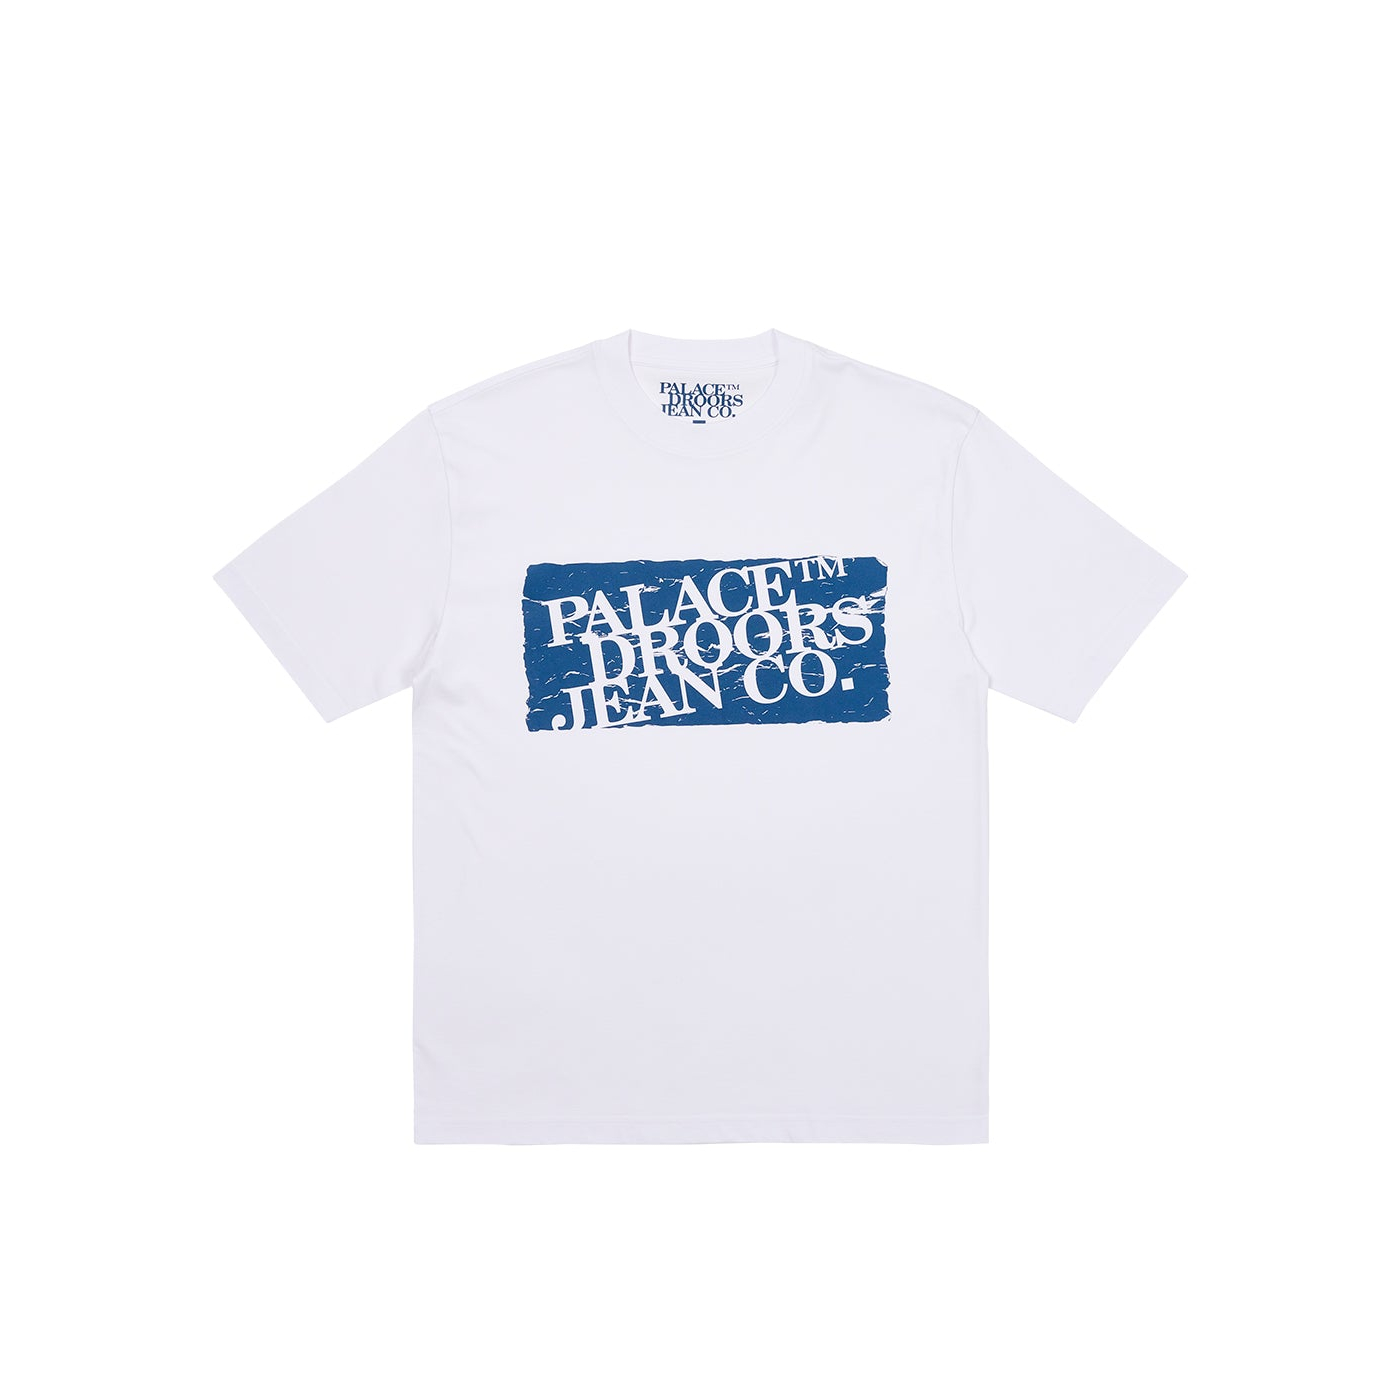 Thumbnail PALACE DROORS T-SHIRT WHITE one color